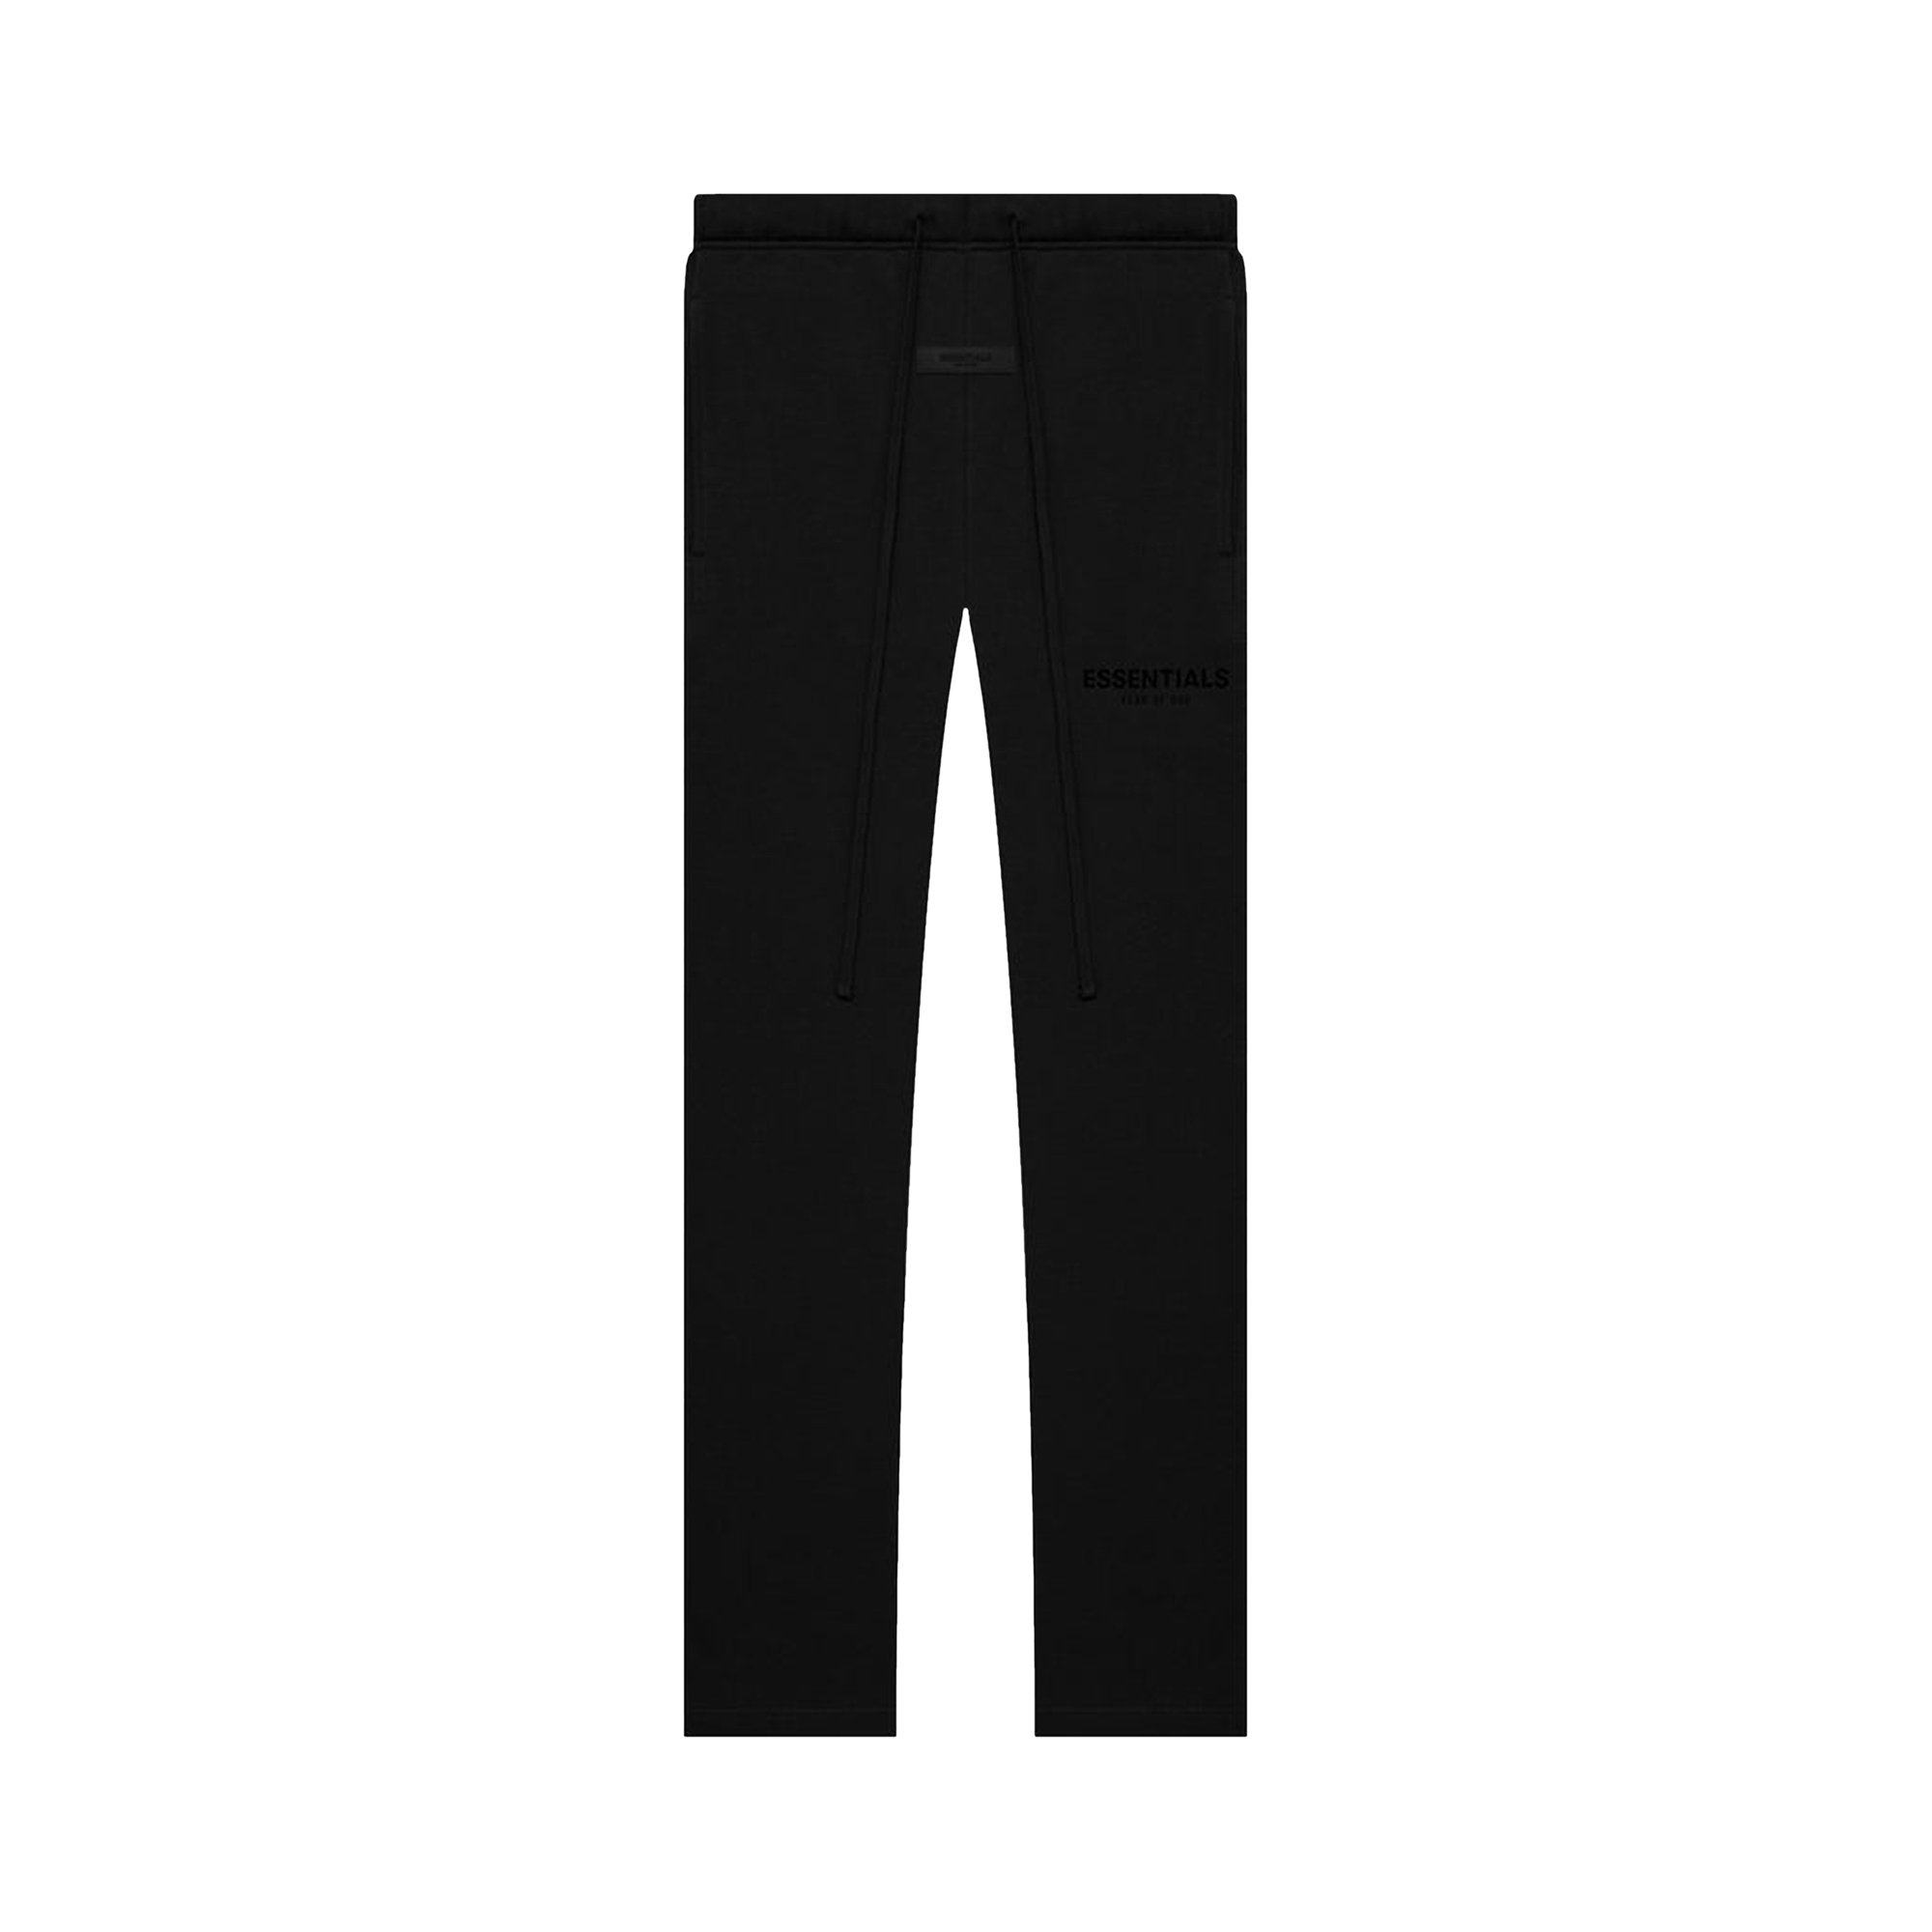 Buy Fear of God Essentials Relaxed Sweatpants 'Stretch Limo